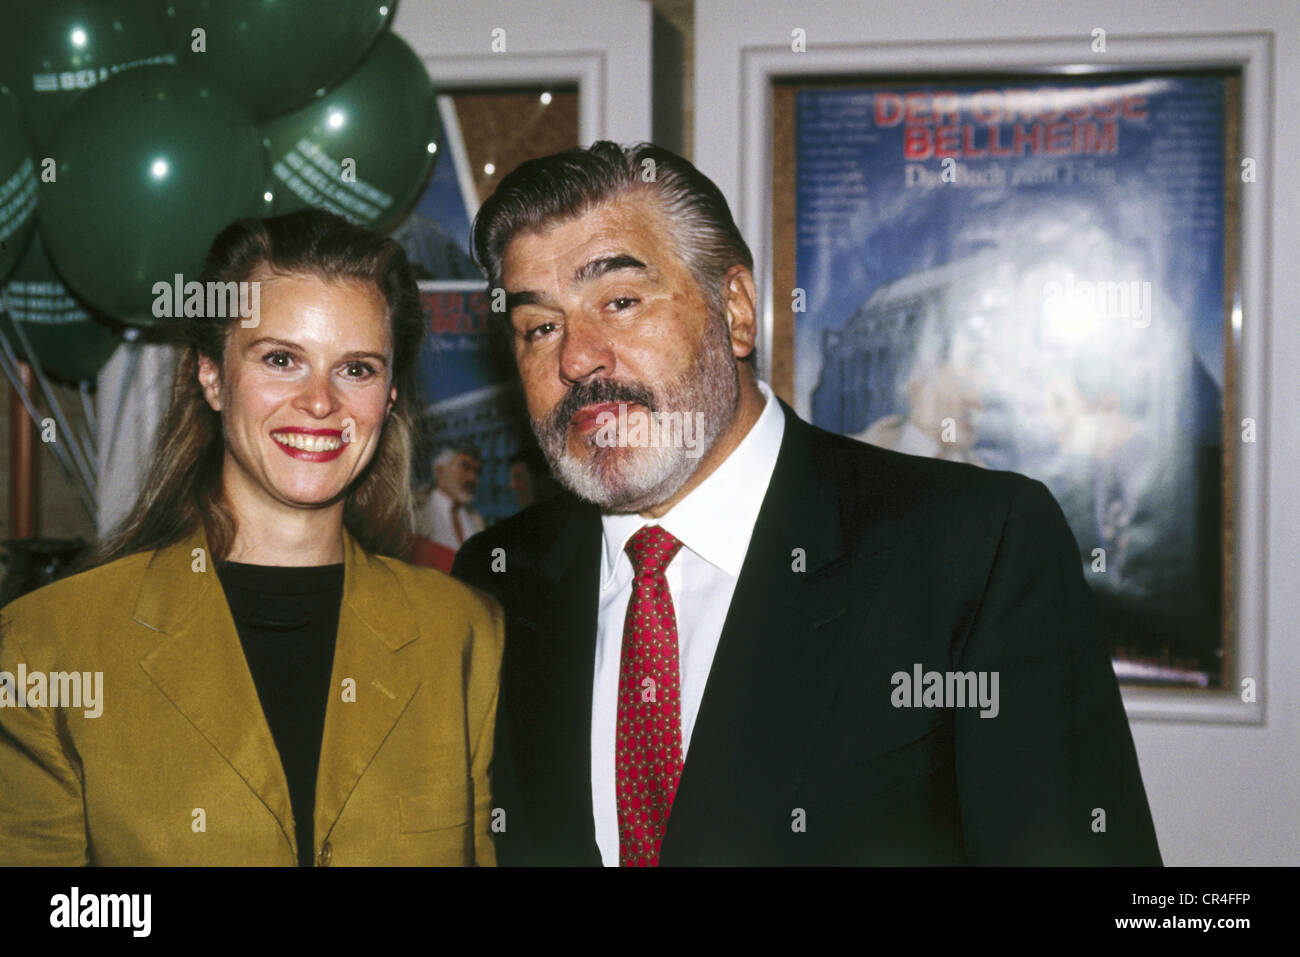 Adorf, Mario  * 8.9.1930, German actor, with Leslie Malton, at press conference for 'Der grosse Bellheim', 1991, , Stock Photo